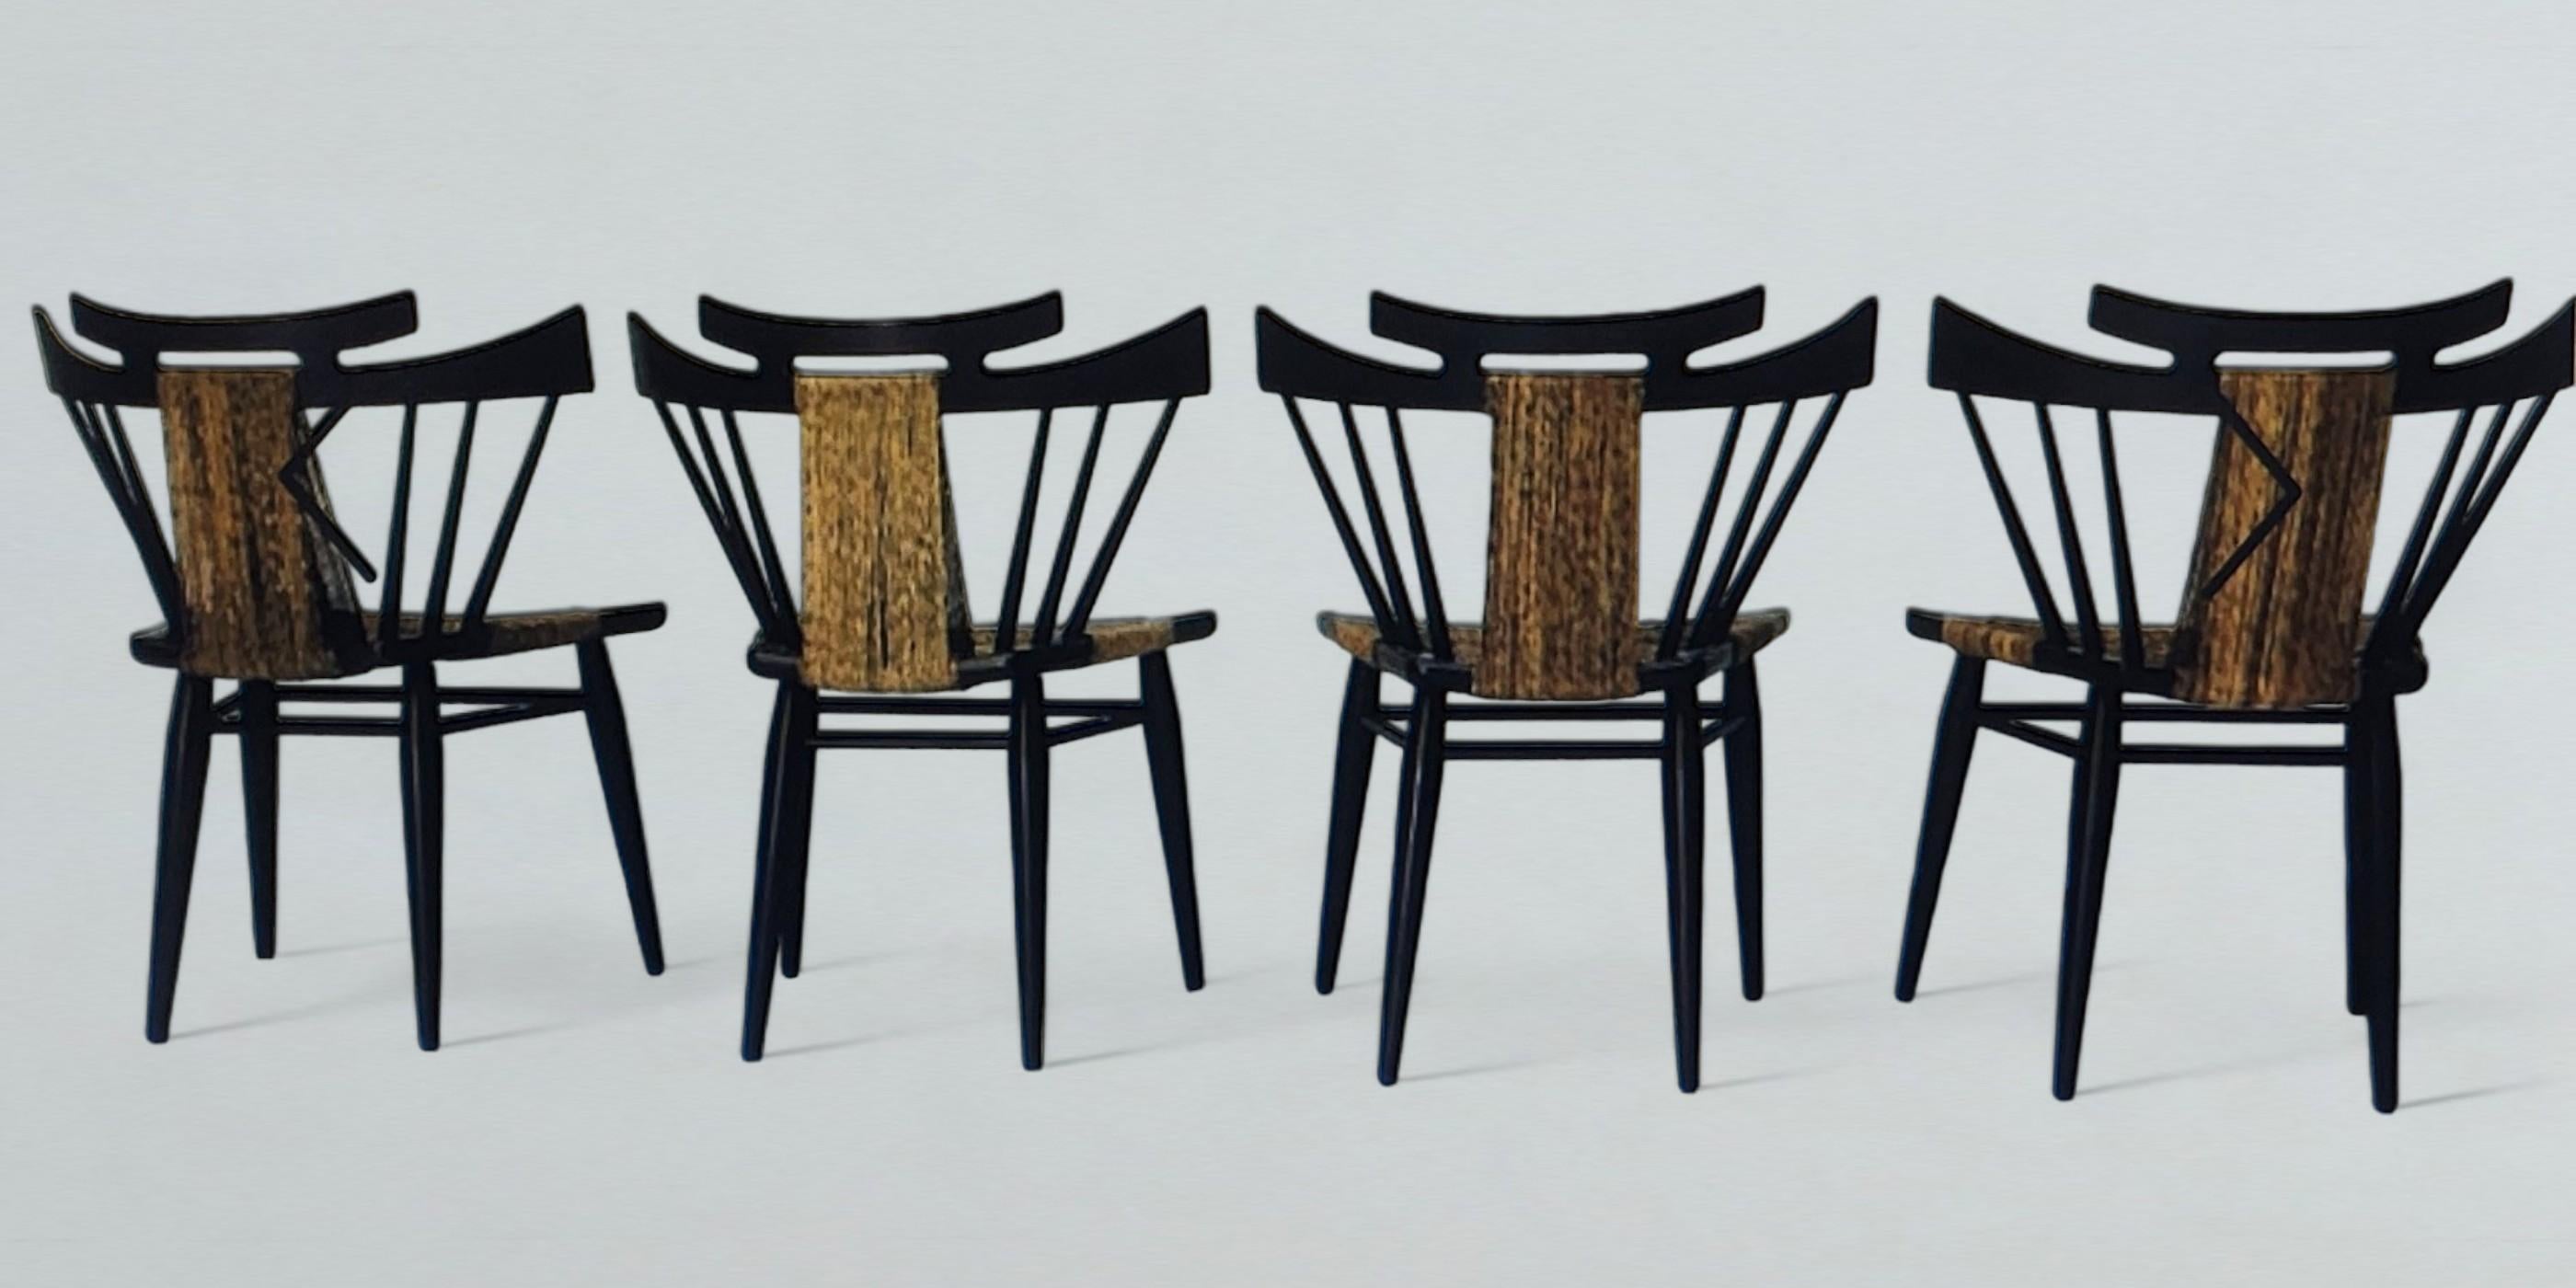 Four vintage Yucatan side chairs by Edmund Spence for his Mexican manufacturer Industria Mueblera, circa 1958. The solid mahogany framed spindle back chairs with their original woven sea grass seats and sea grass banding are unusual combination.
The